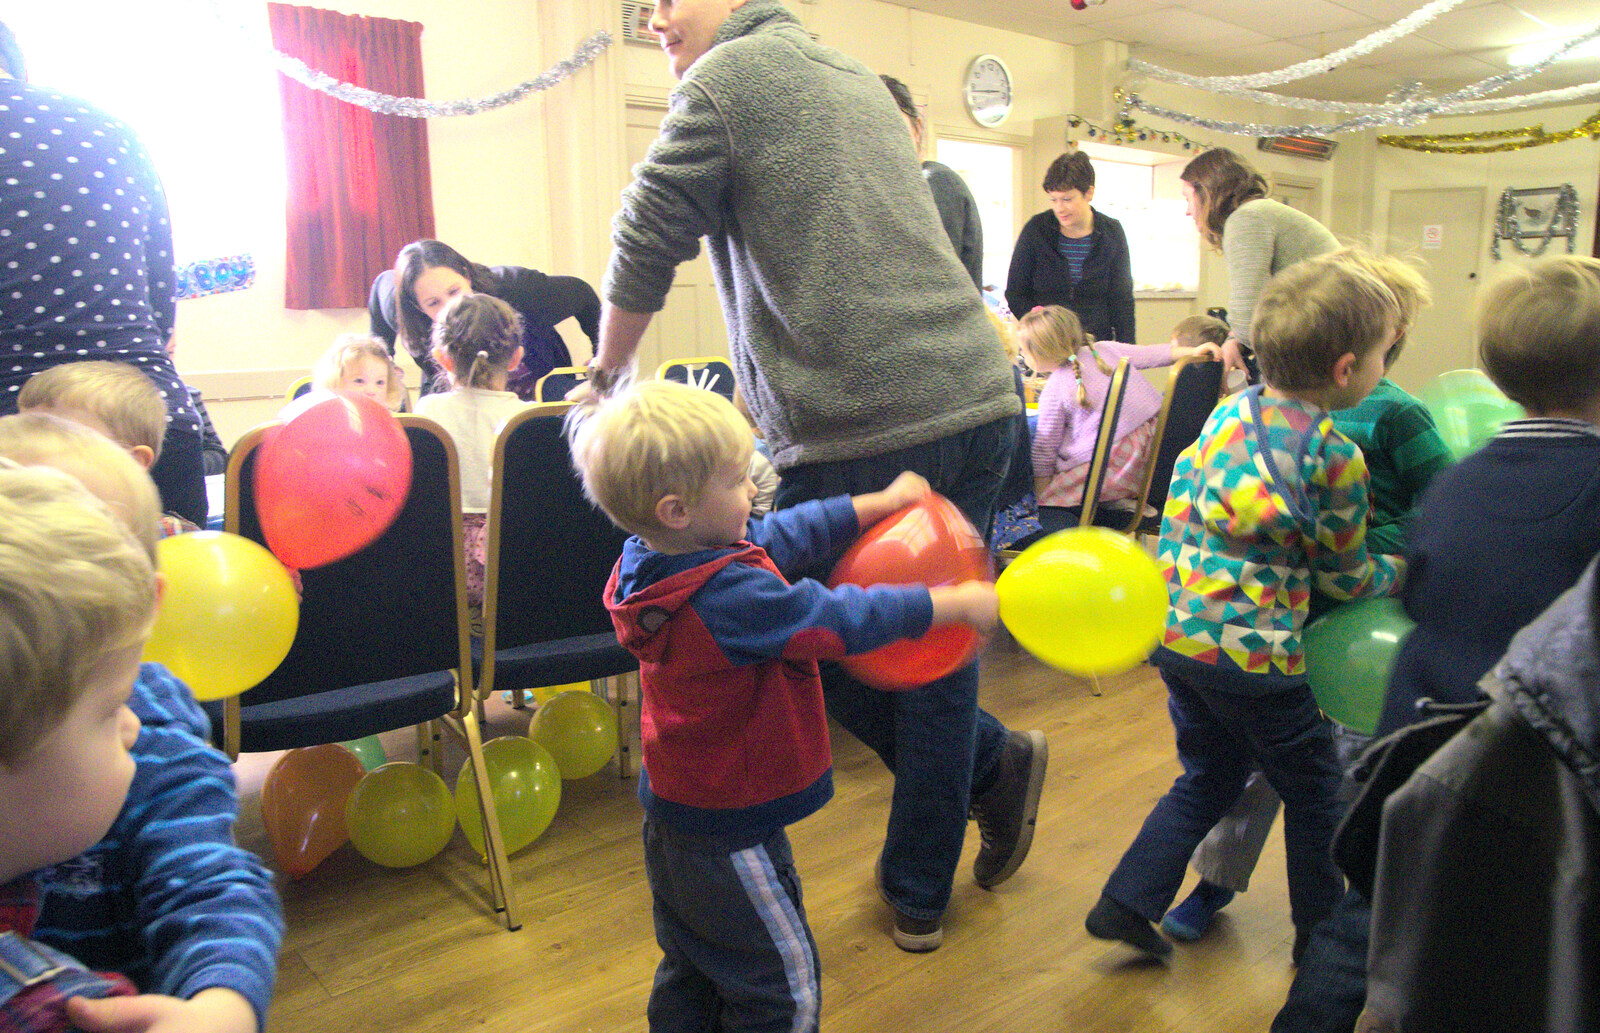 Harry chases people whilst weilding balloons from The Eye Lights and a Thorpe Abbots Birthday, Suffolk and Norfolk - 6th December 2014